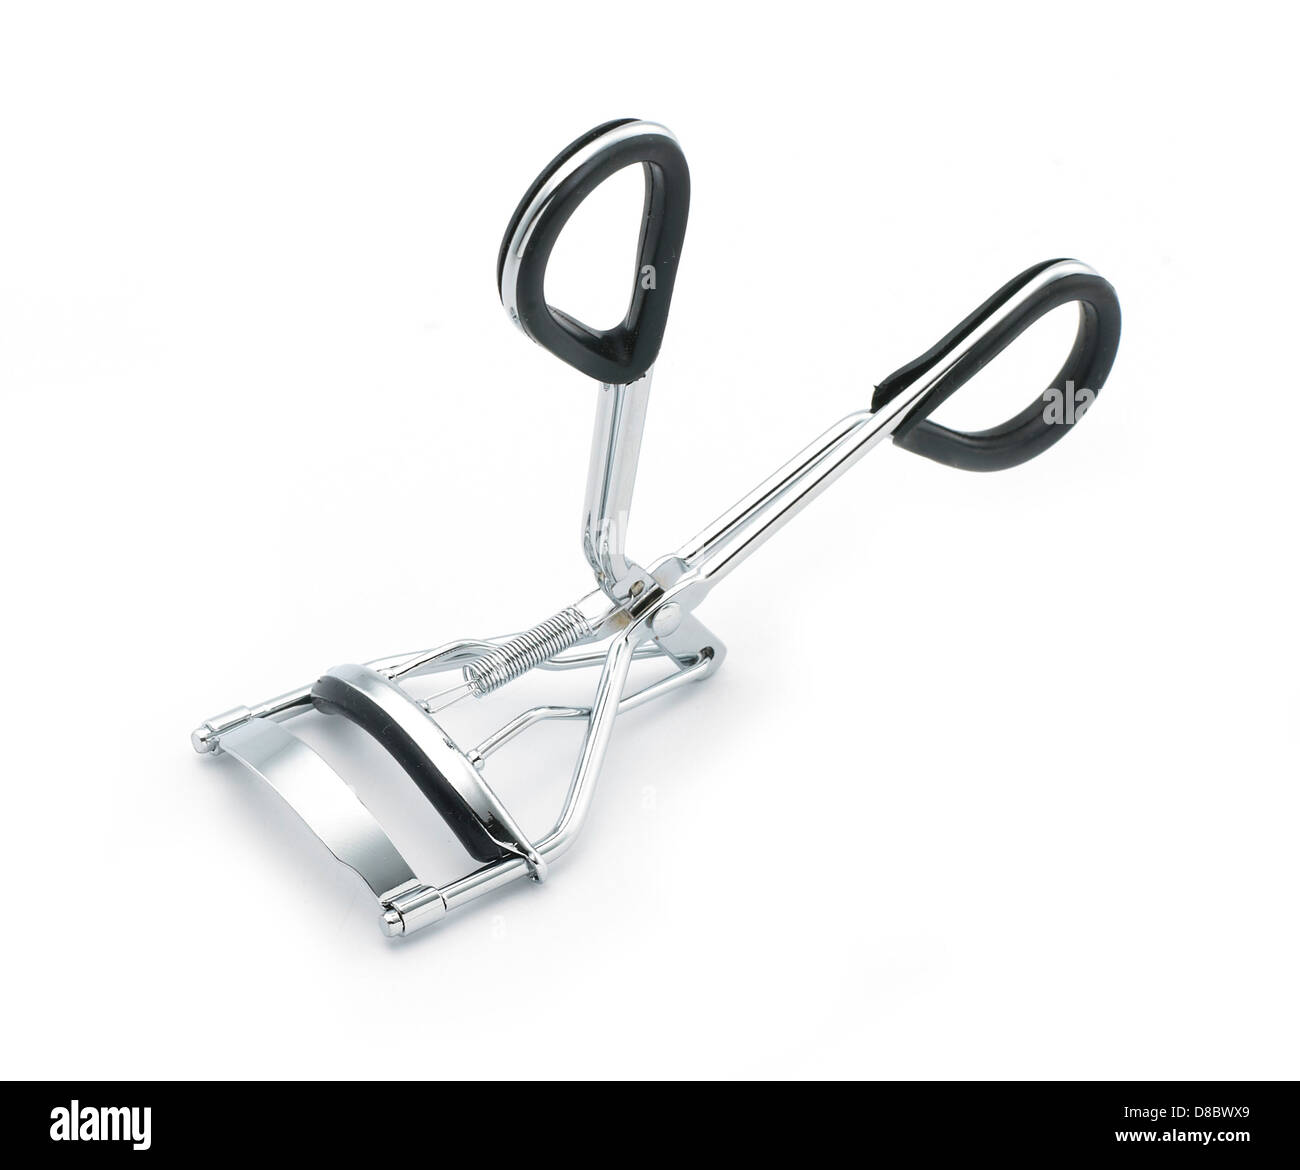 silver and black metal eyelash curlers cut out onto a white background Stock Photo